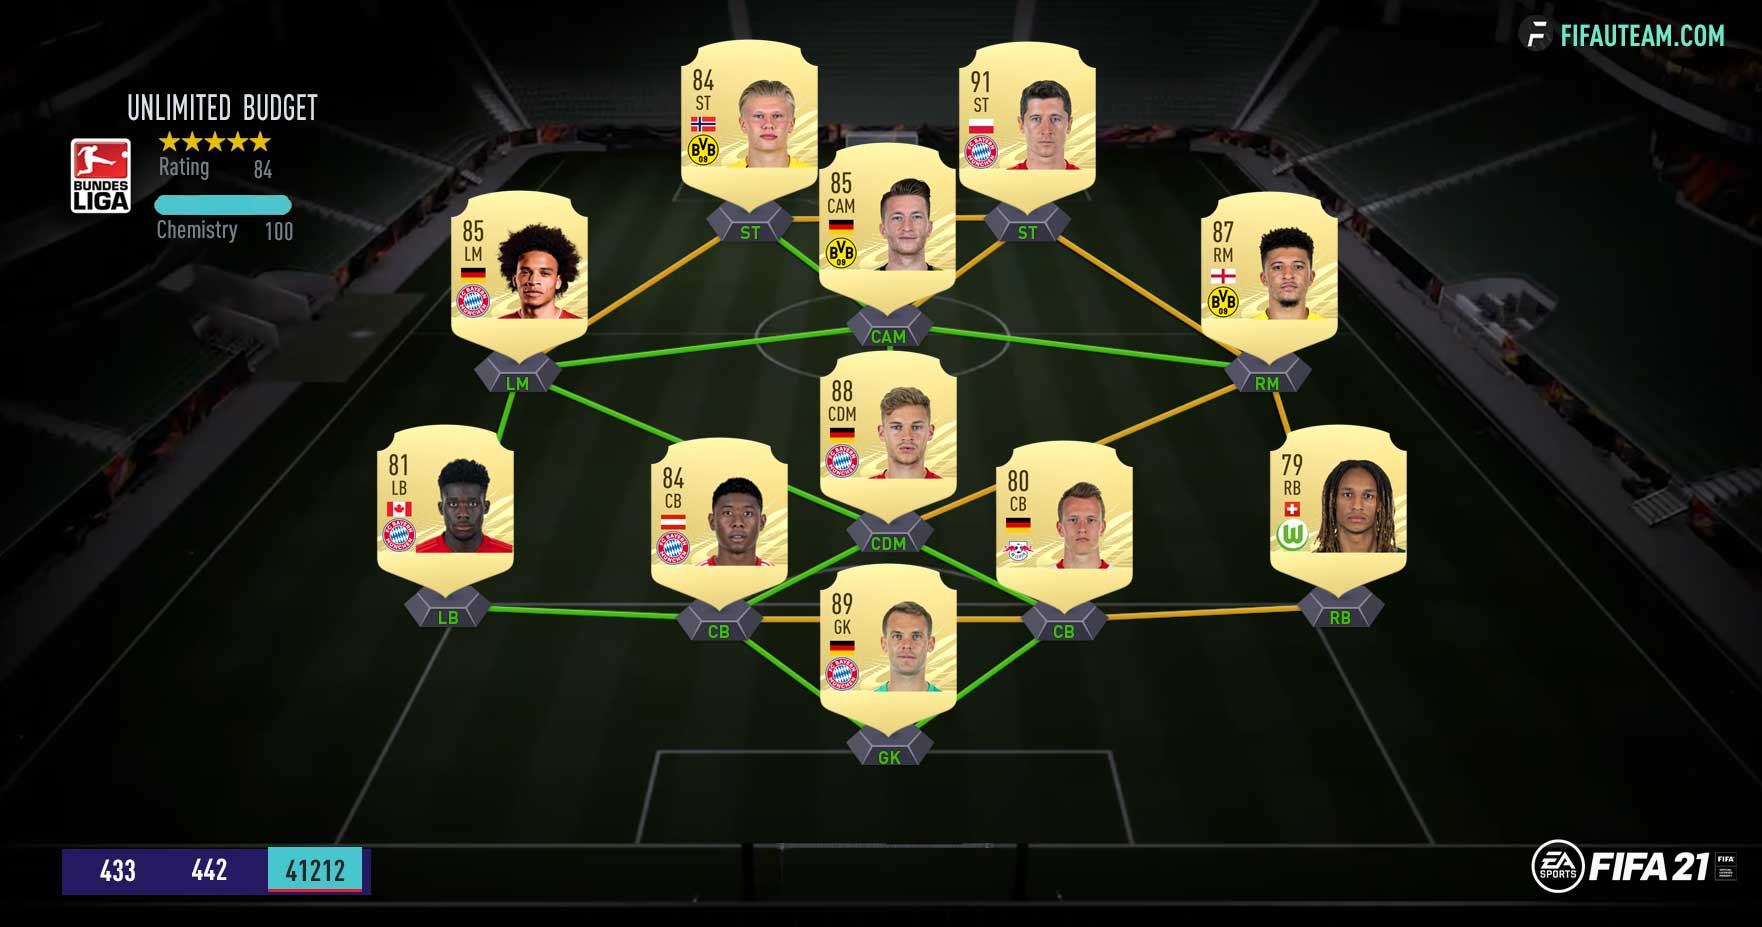 The Best FIFA 21 League to Play on FIFA 21 Ultimate Team